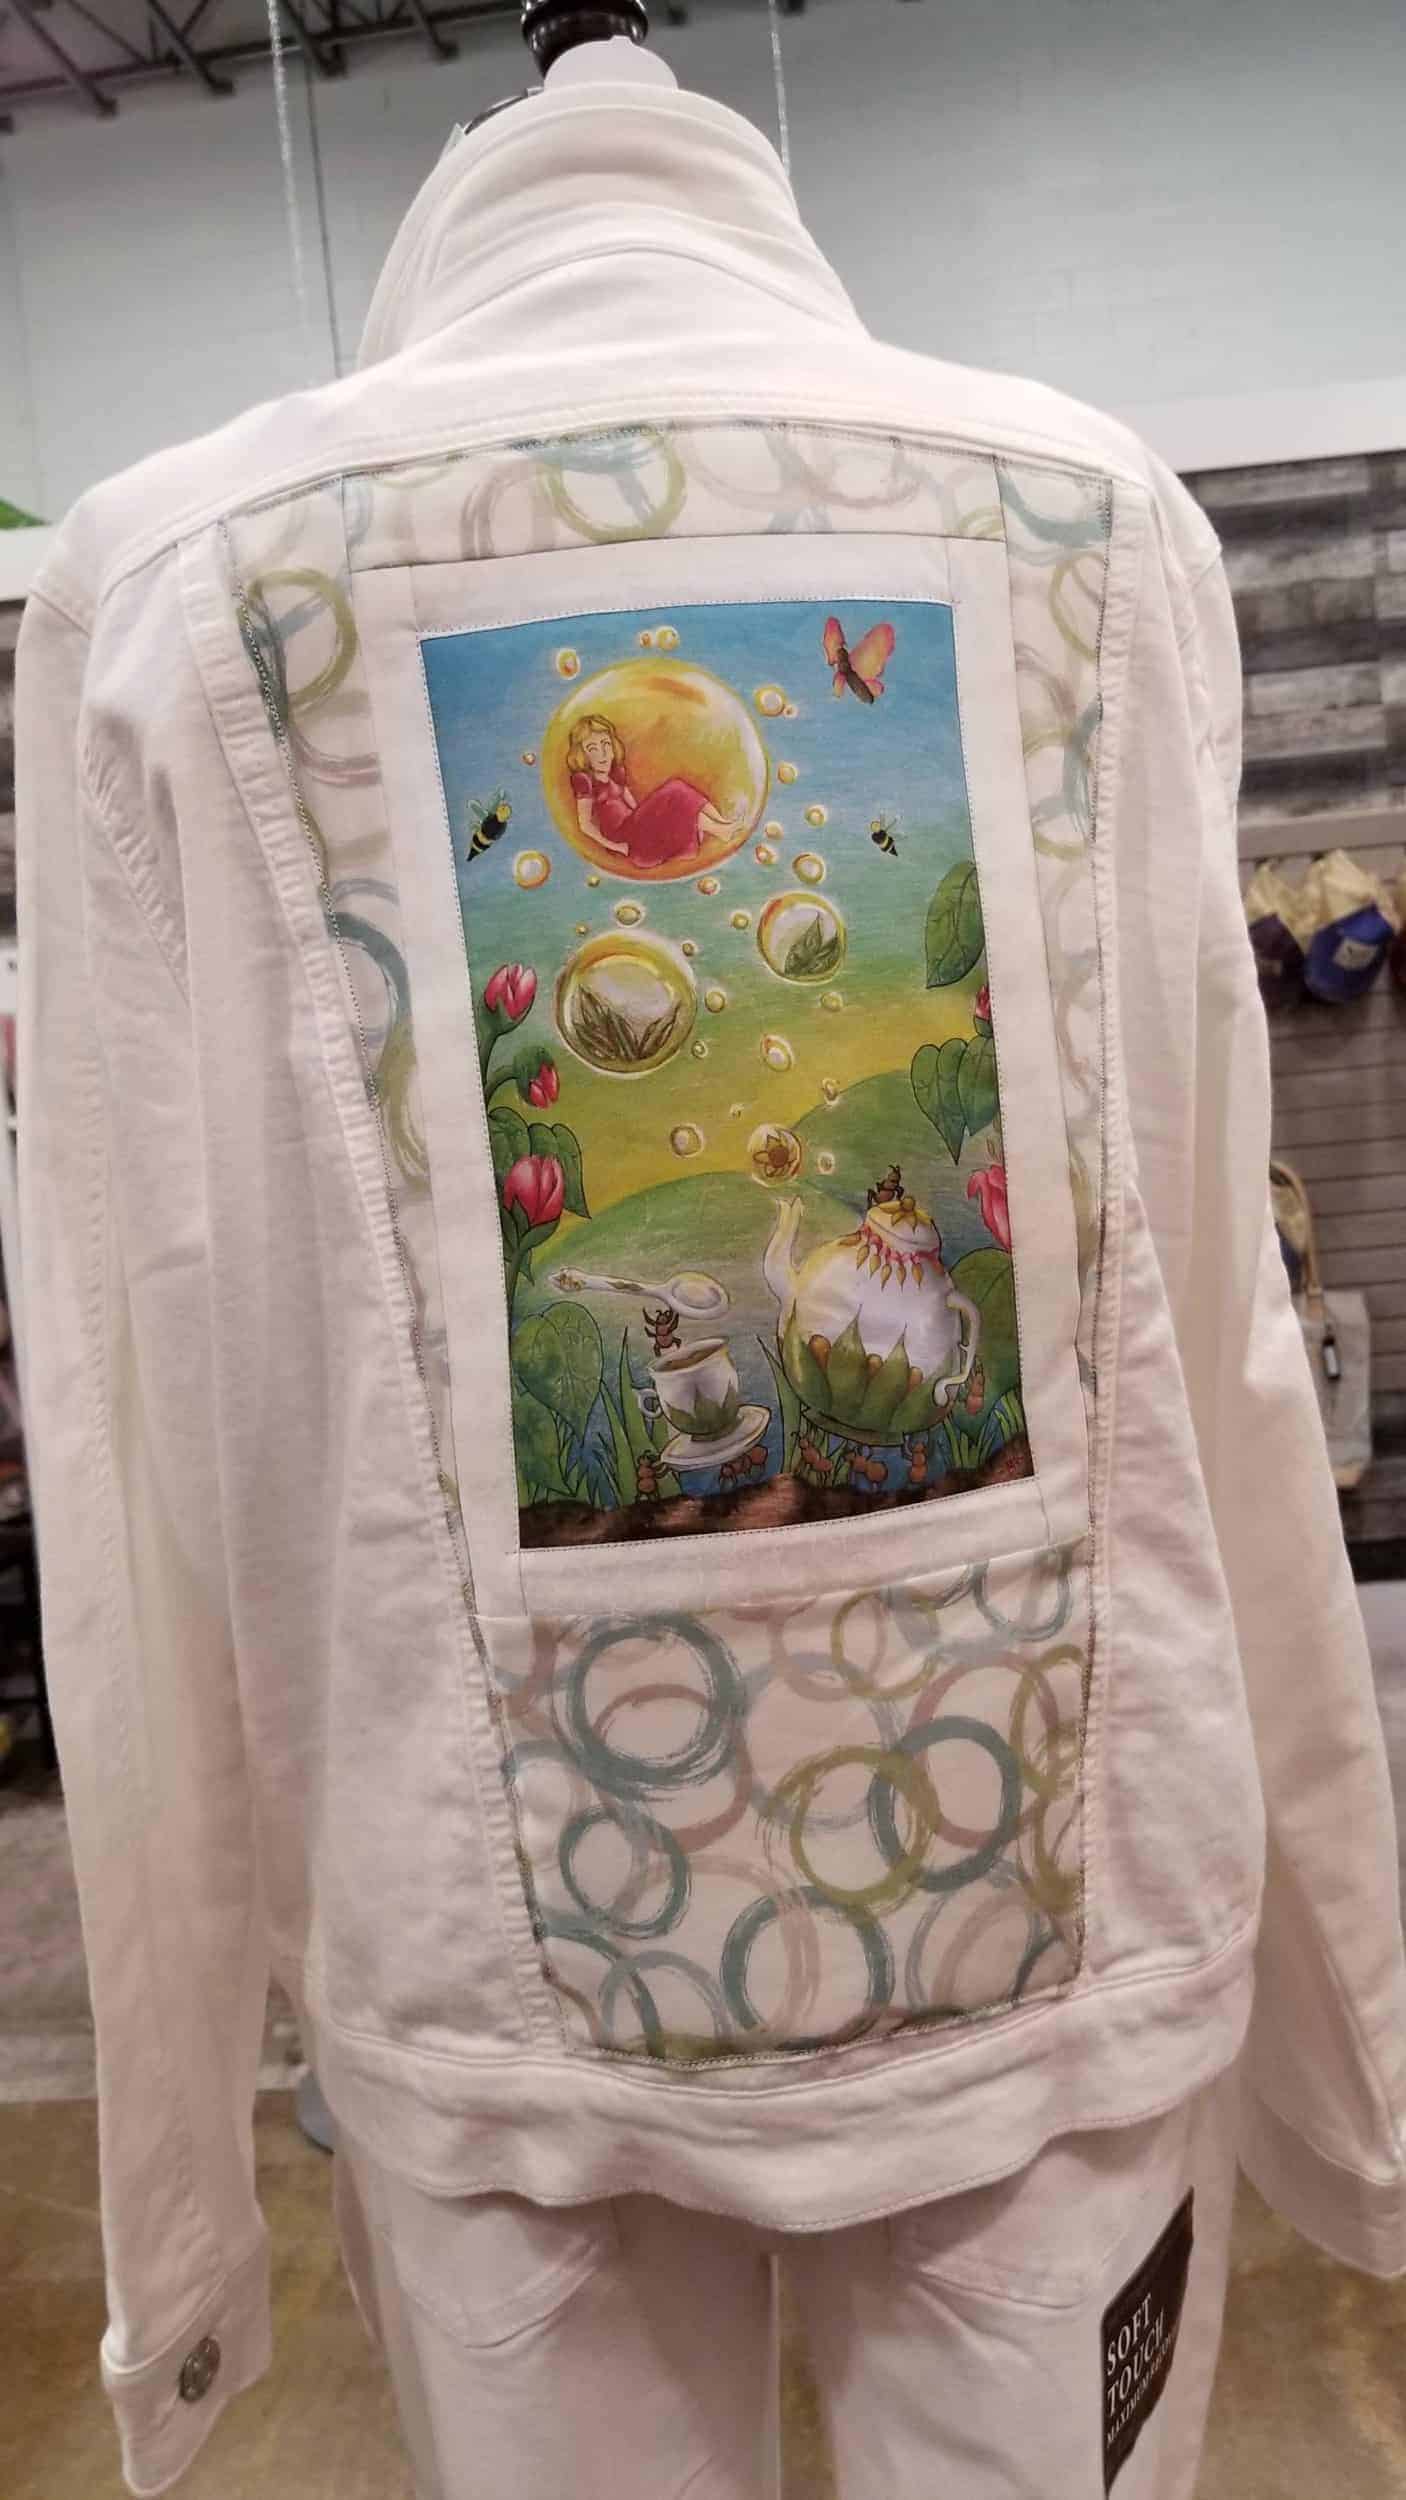 This NEW Upcycled Quilted White Jean Jacket "Bubble Garden" - Large - One of a kind artwork is made with love by The Creative Soul Sisters! Shop more unique gift ideas today with Spots Initiatives, the best way to support creators.